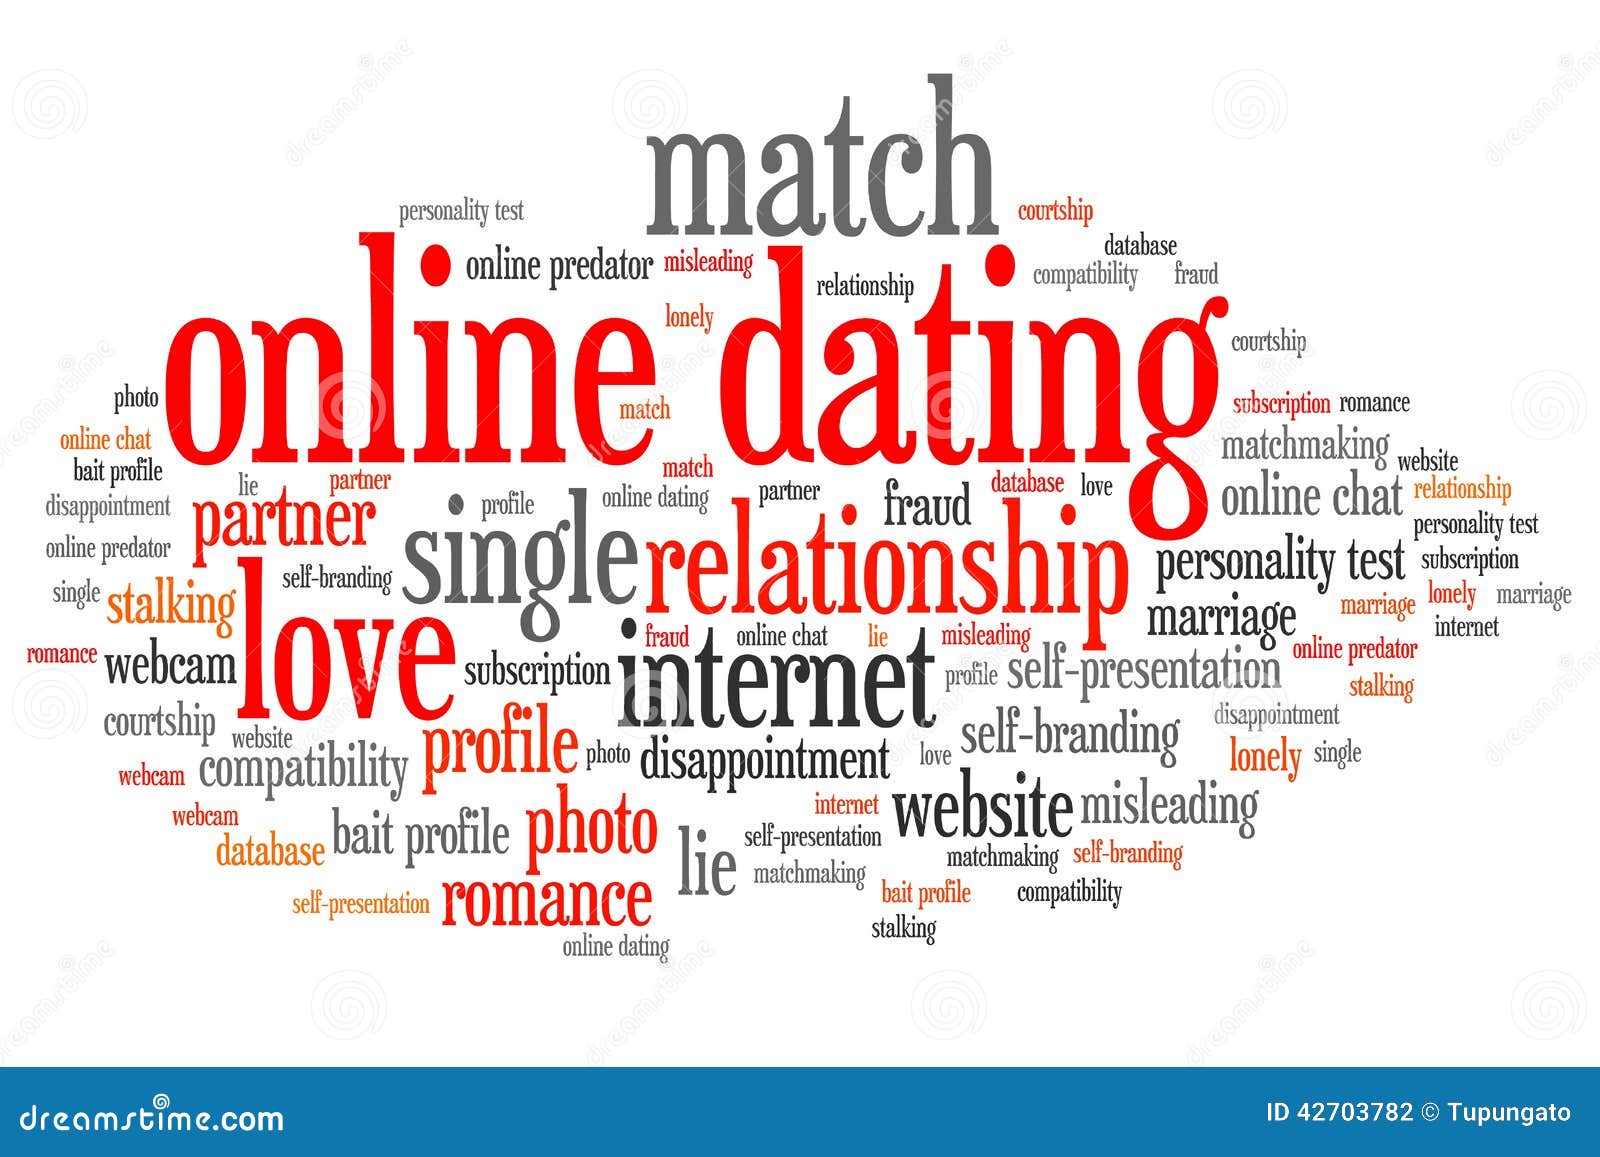 online chat matchmaking